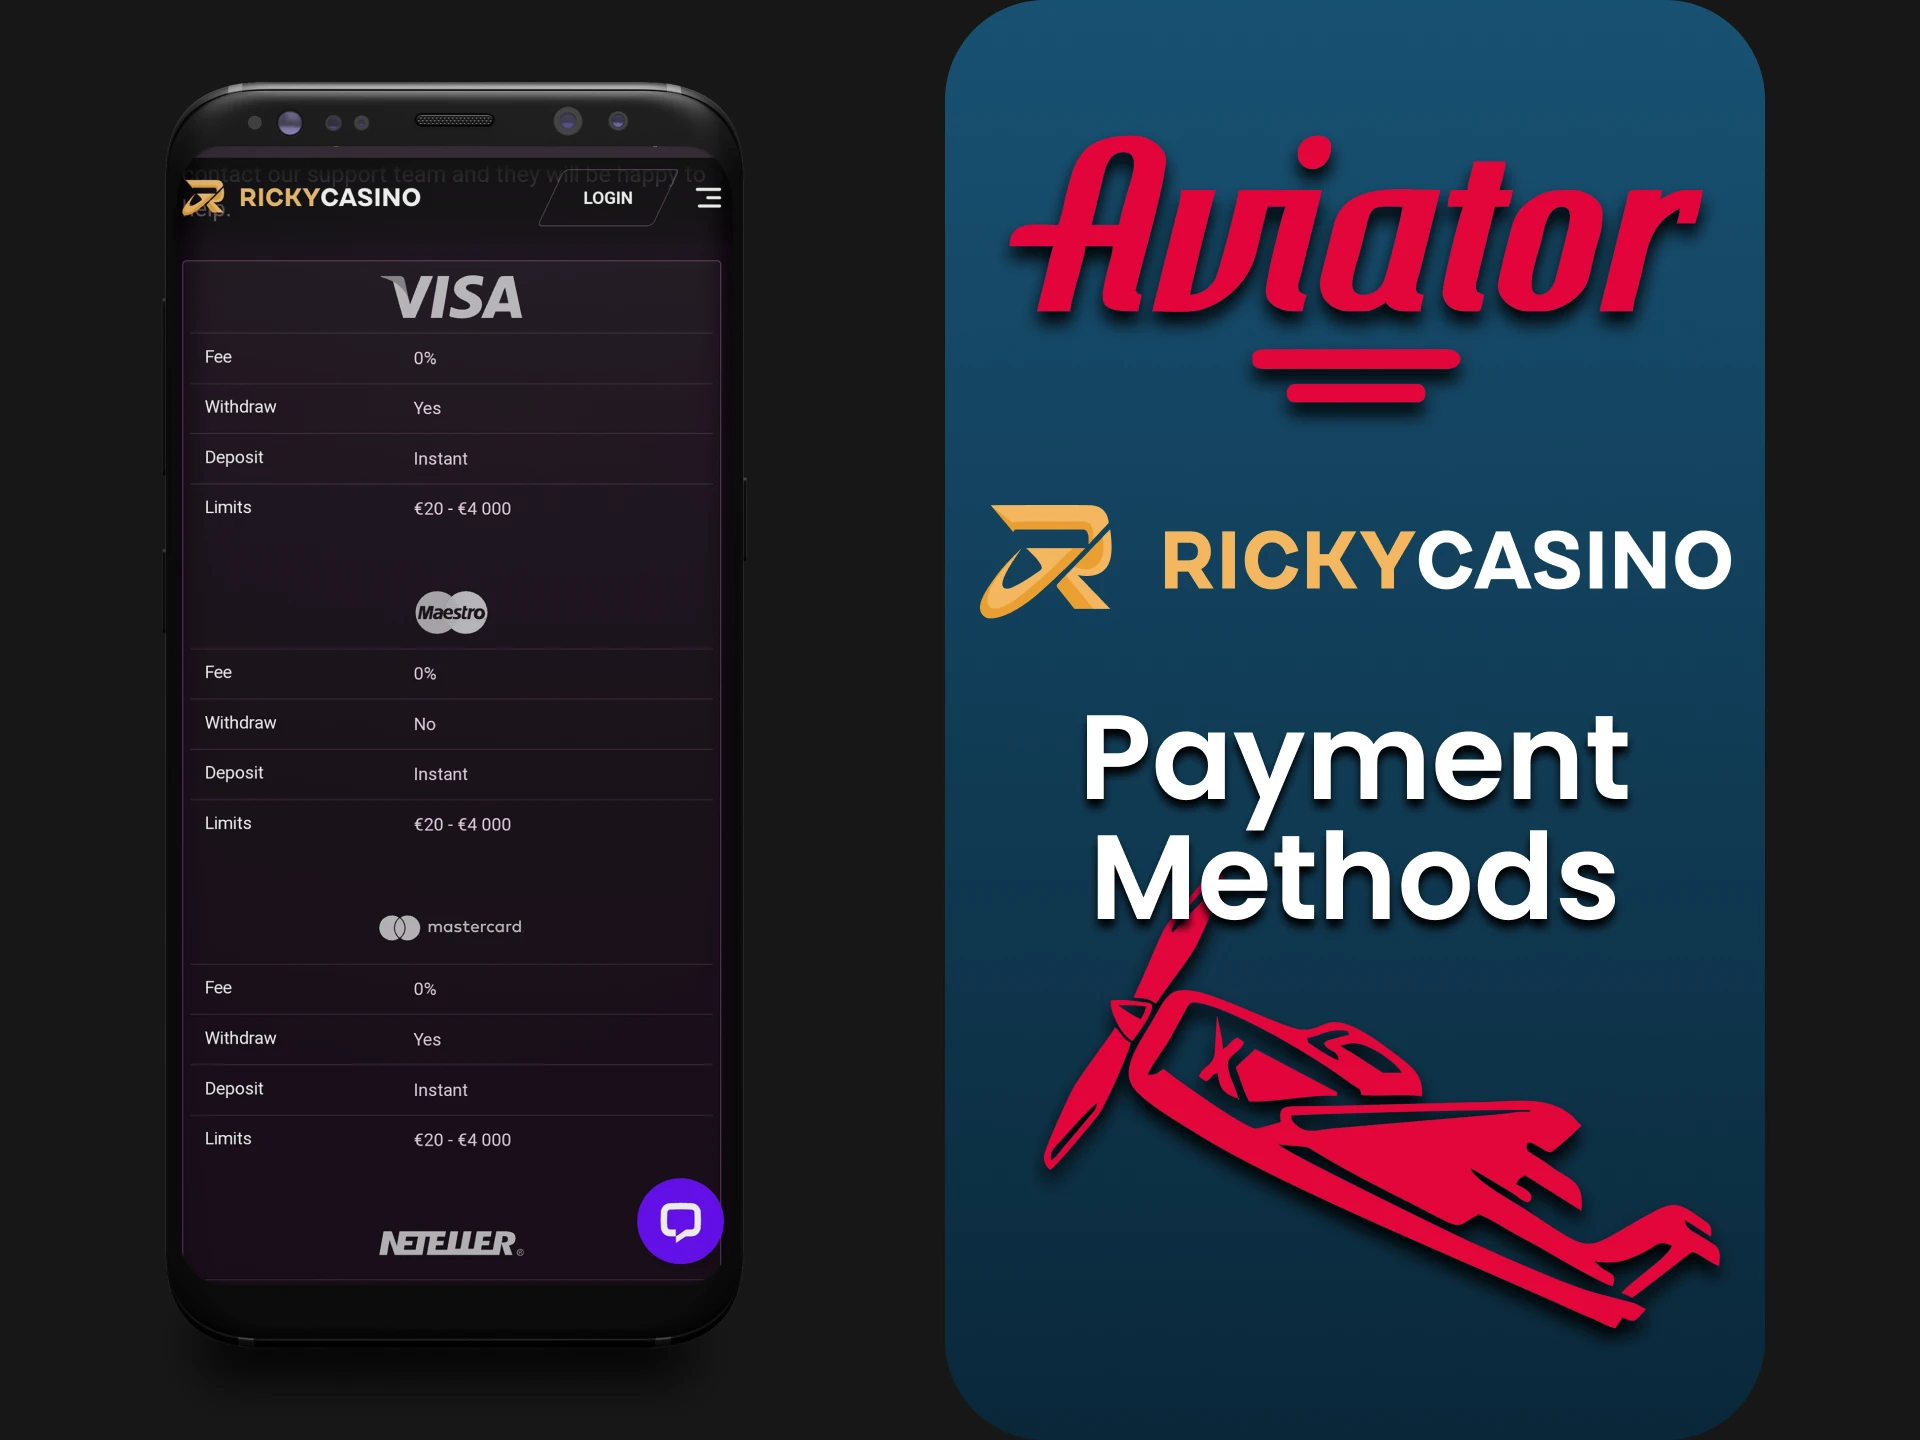 Choose a payment method for Aviator in the Ricky Casino app.